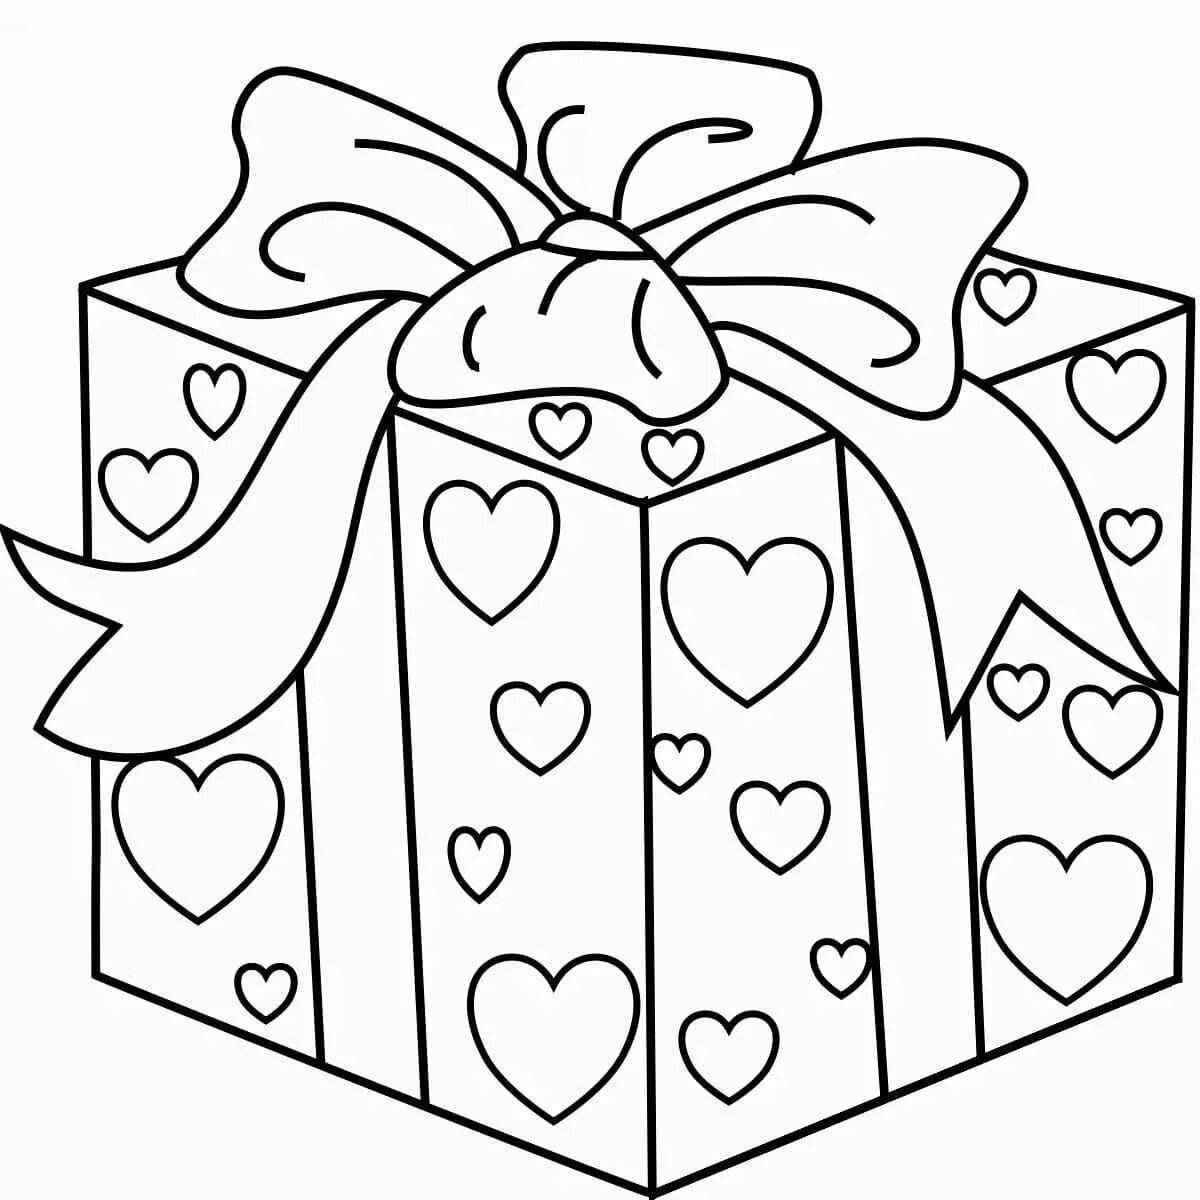 Adorable birthday gift coloring page